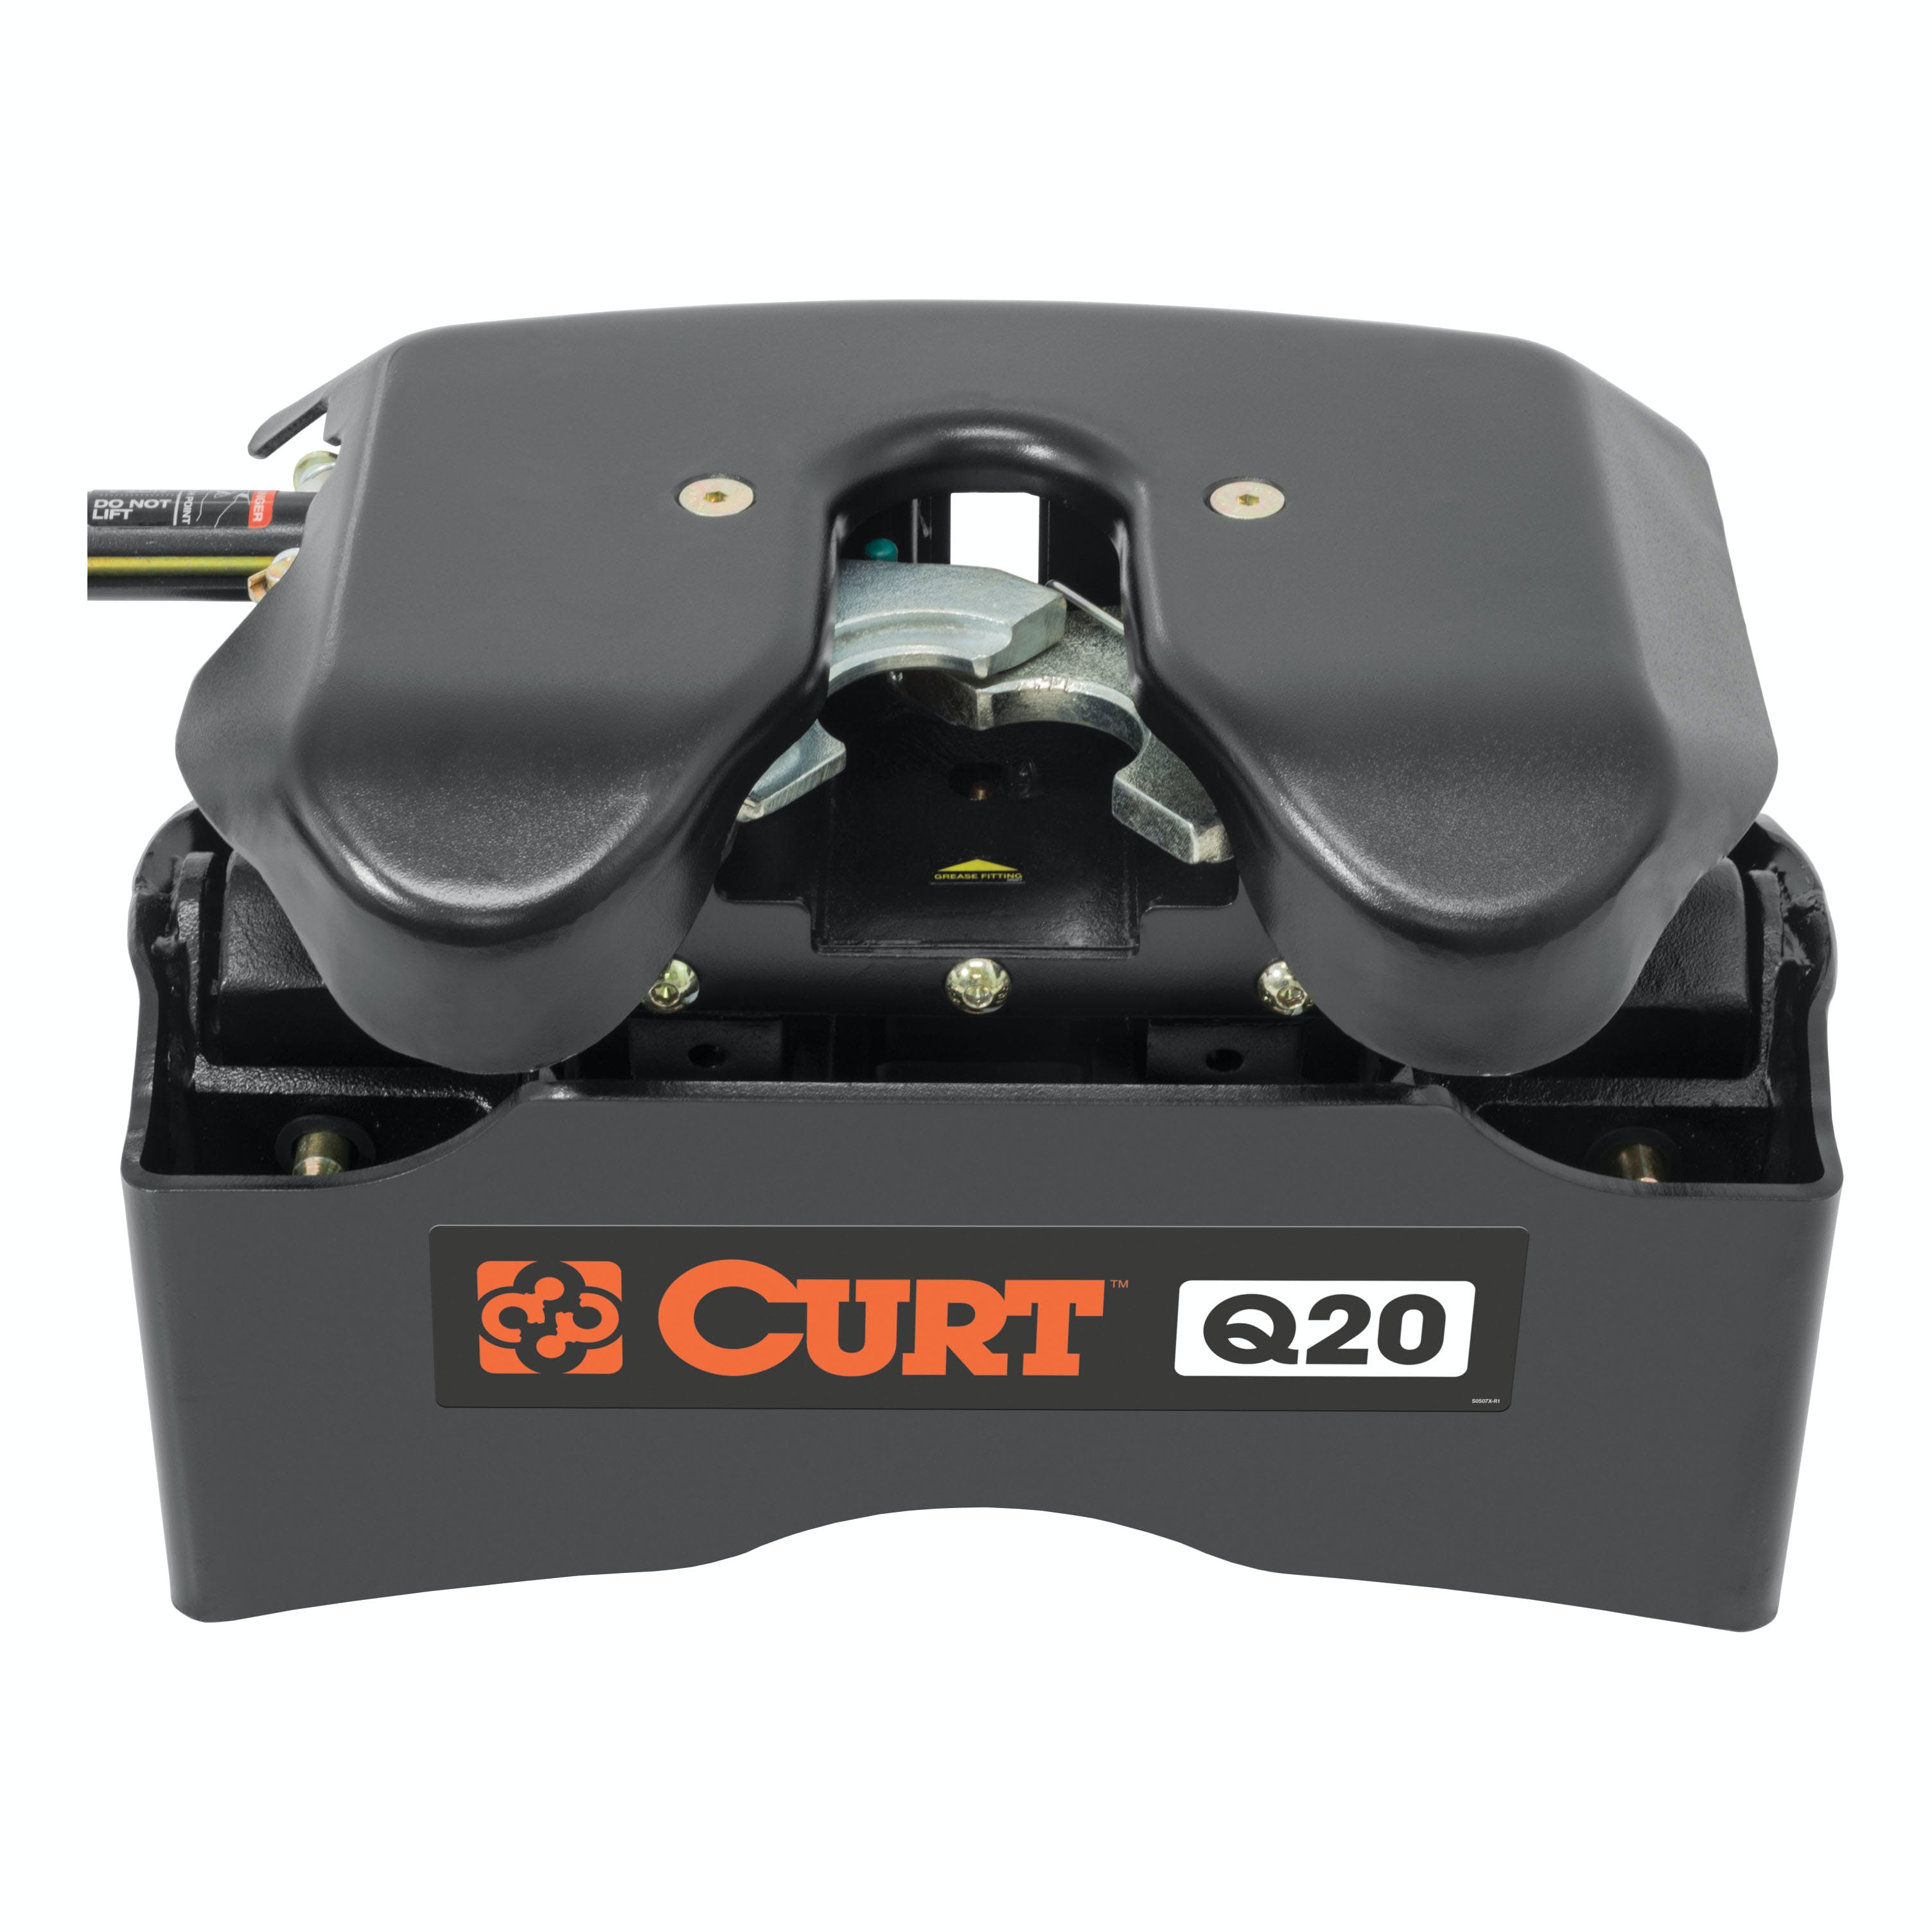 CURT 16045 Q20 5th Wheel Hitch, Select Ram 2500, 3500, 8' Bed Puck System